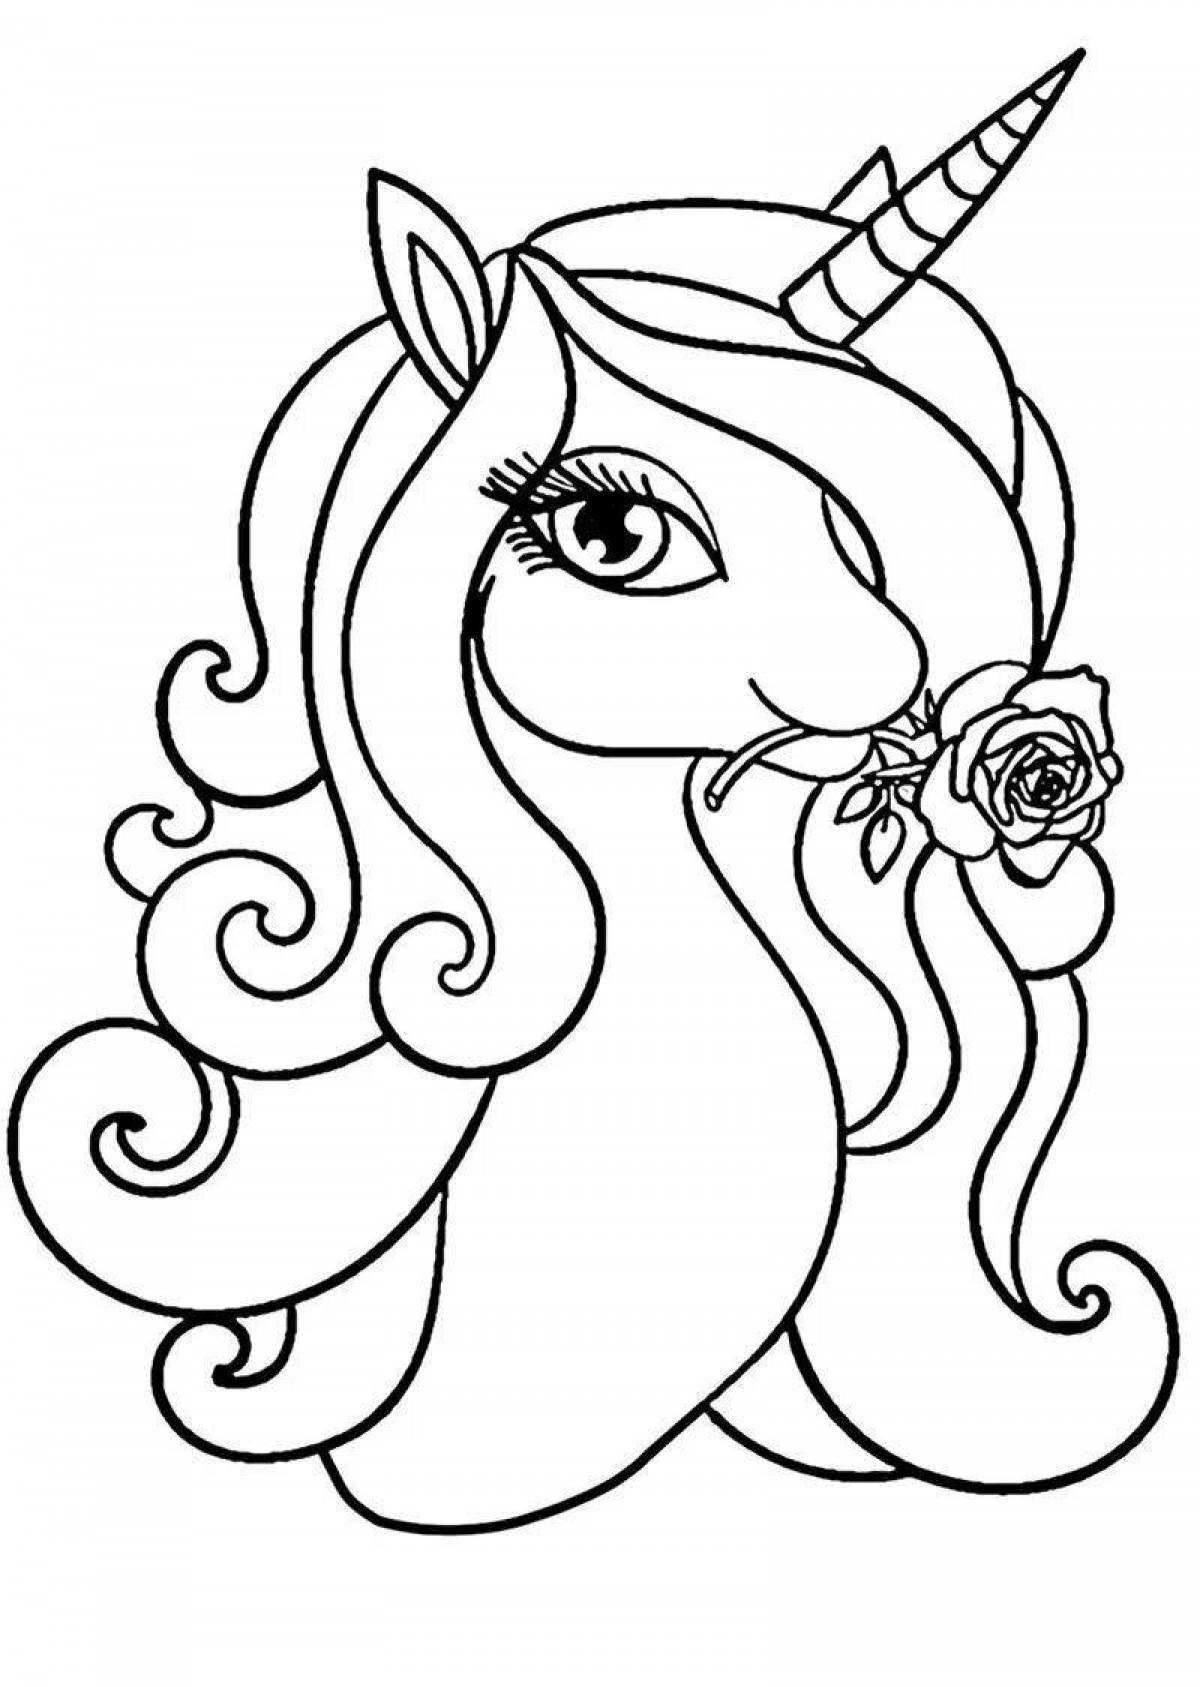 Elegant coloring book for girls with unicorn print